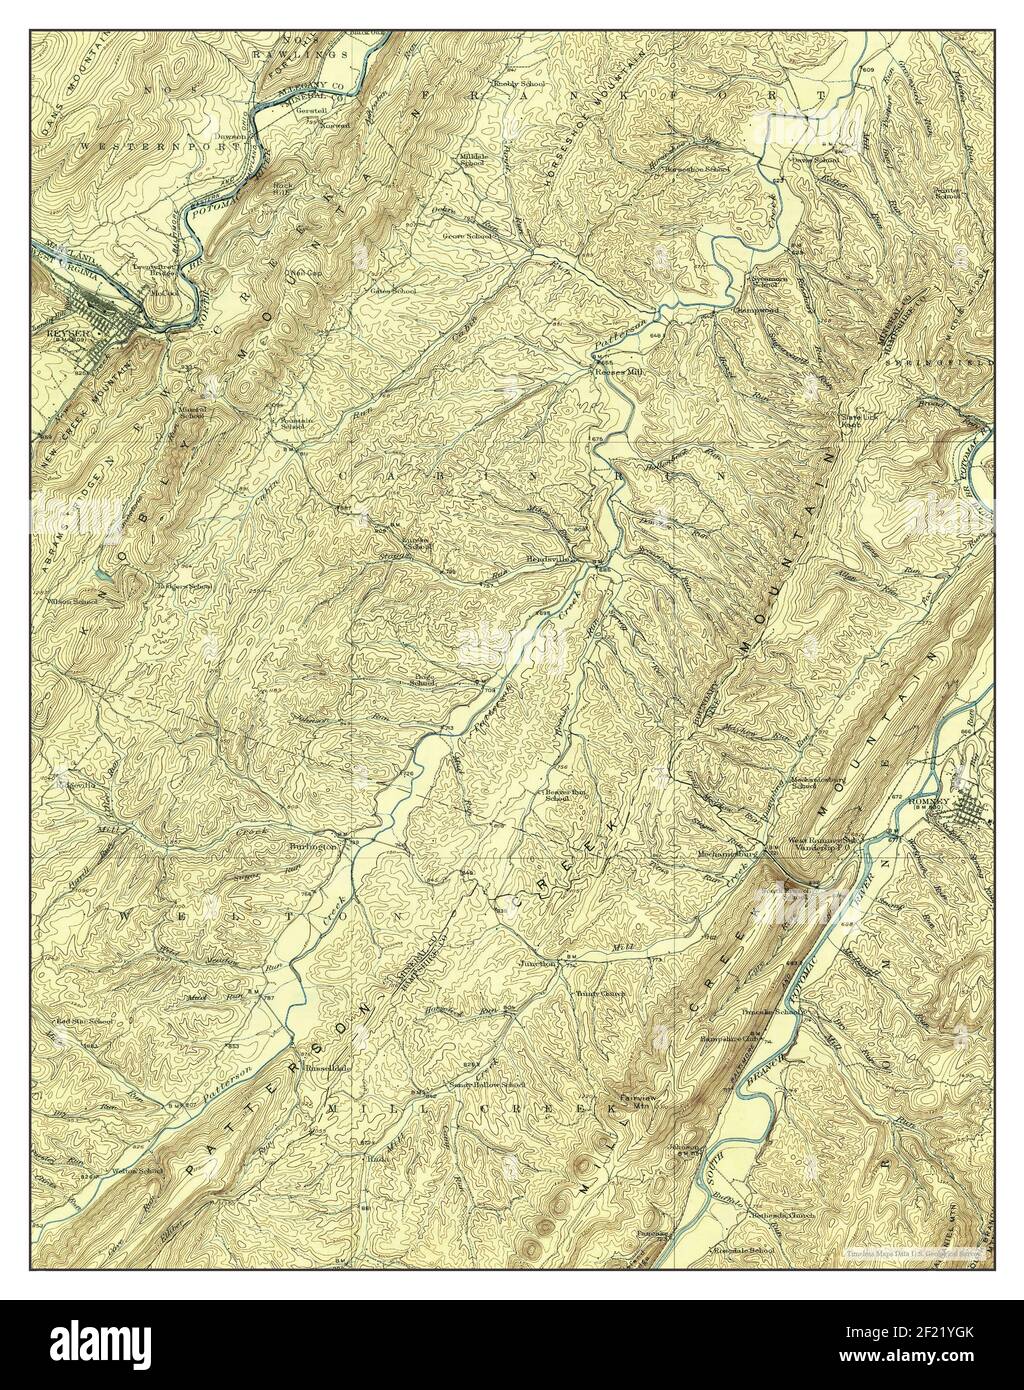 Keyser, West Virginia, map 1922, 1:62500, United States of America by Timeless Maps, data U.S. Geological Survey Stock Photo